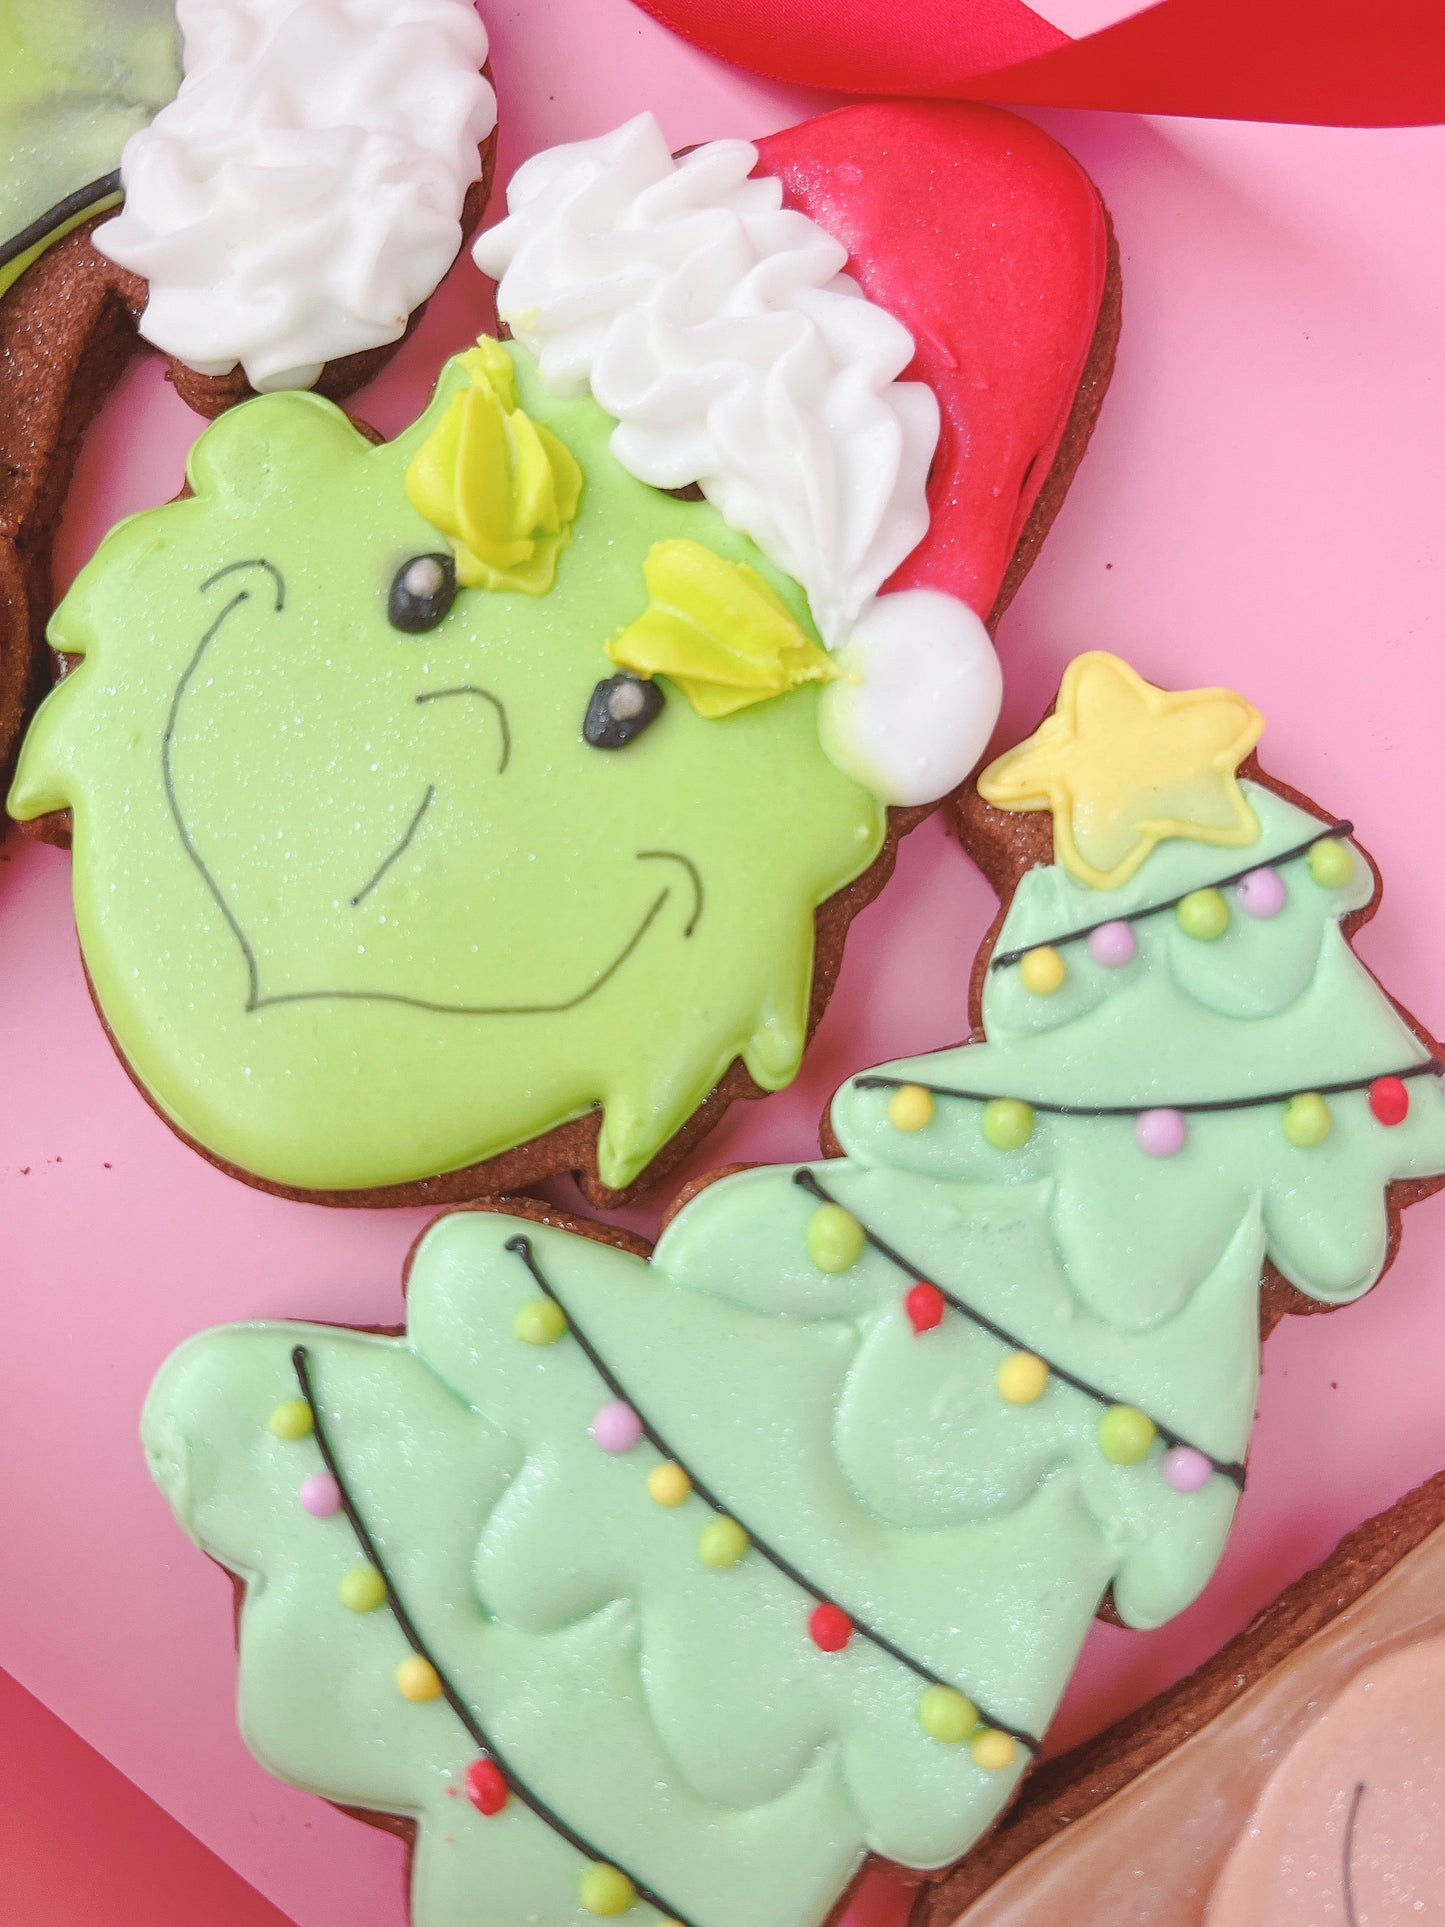 You’re a Mean One, Mr. Grinch Set